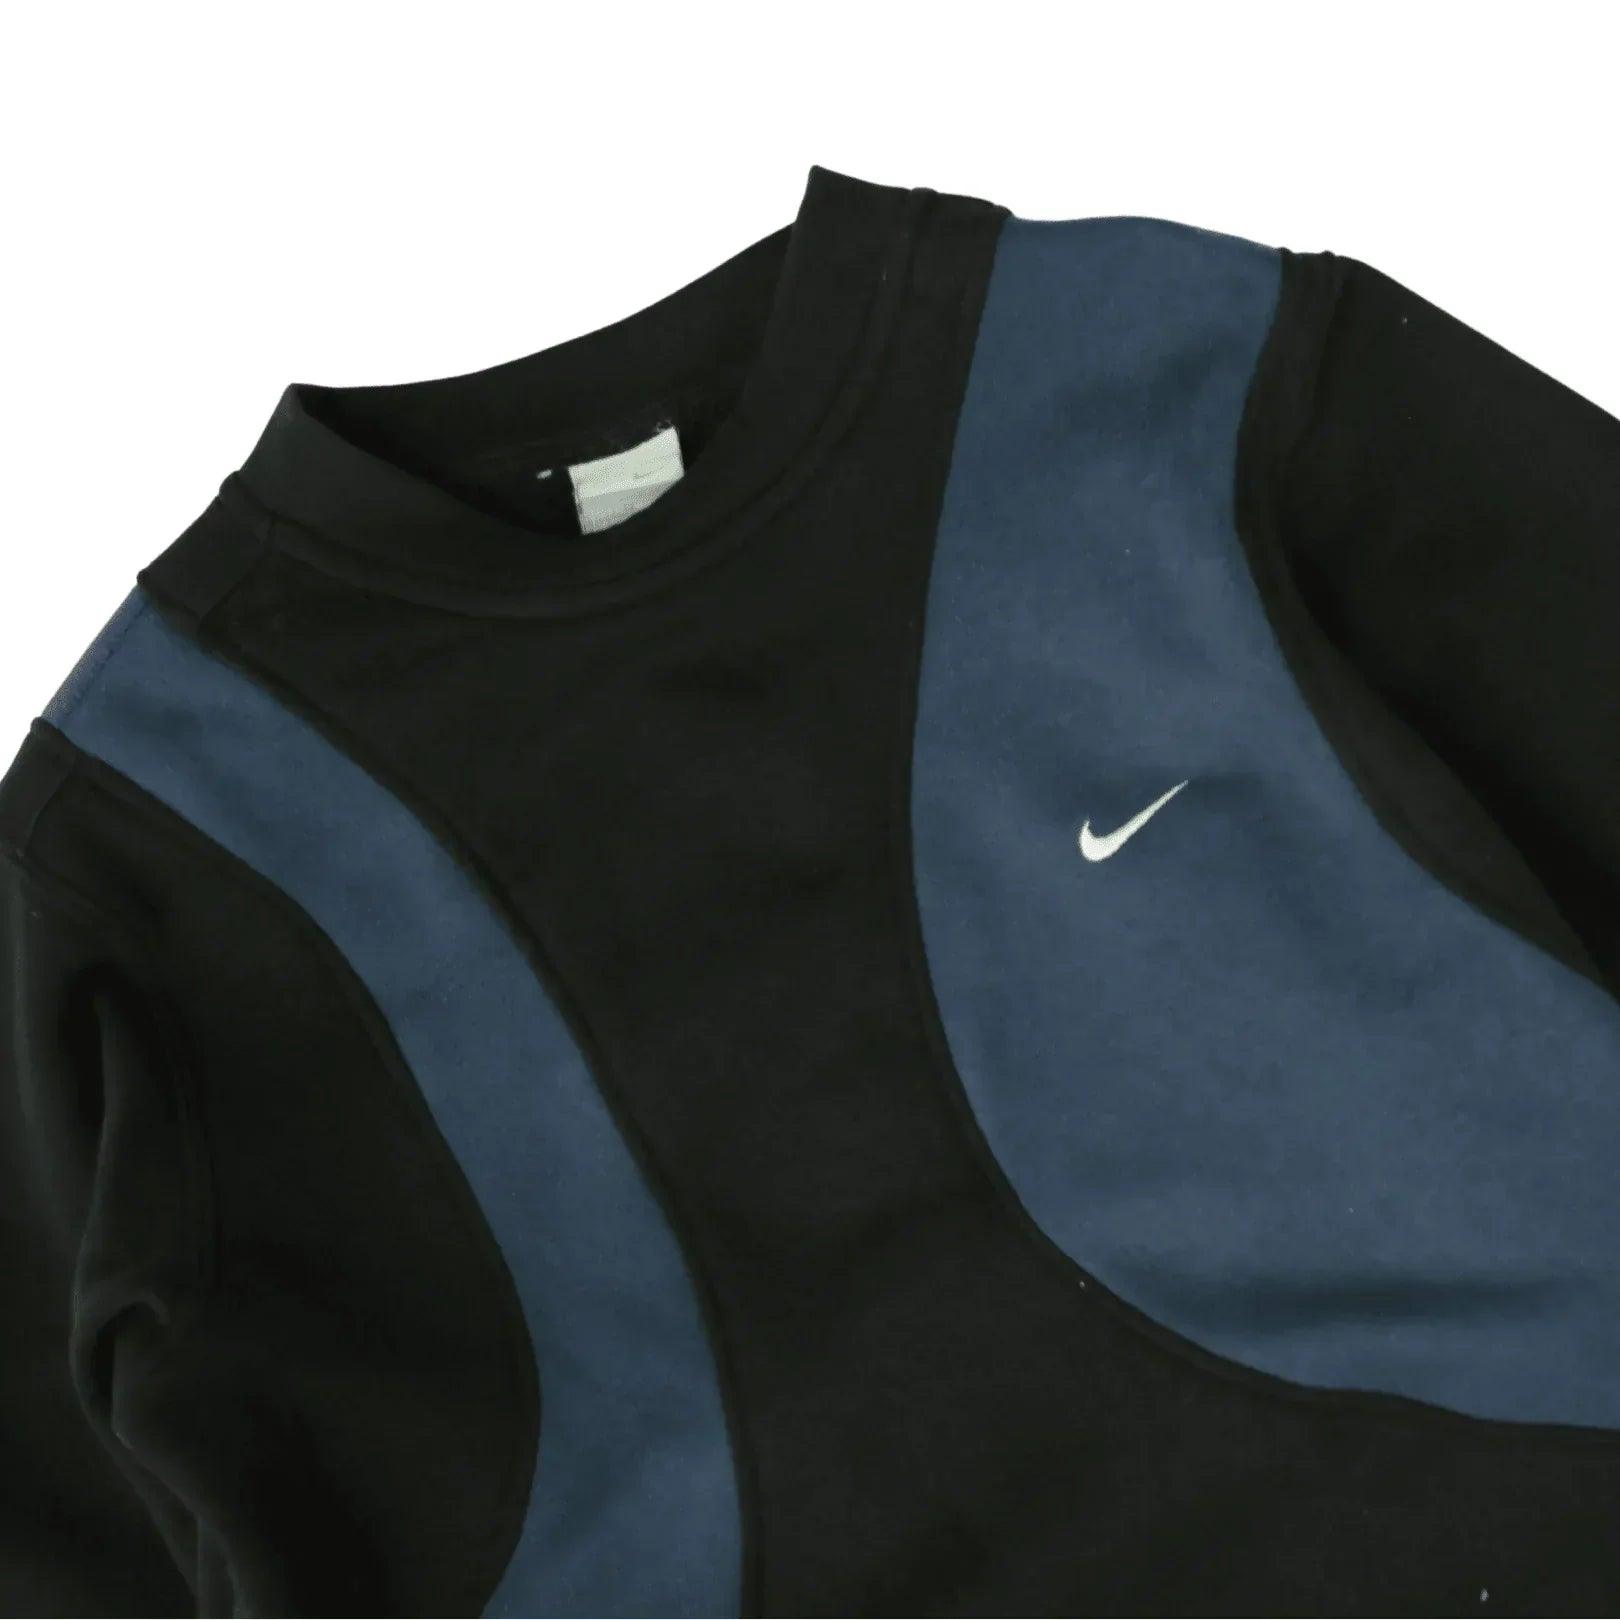 NIKE REWORKED PATTERNED CREWNECK (S) - Known Source